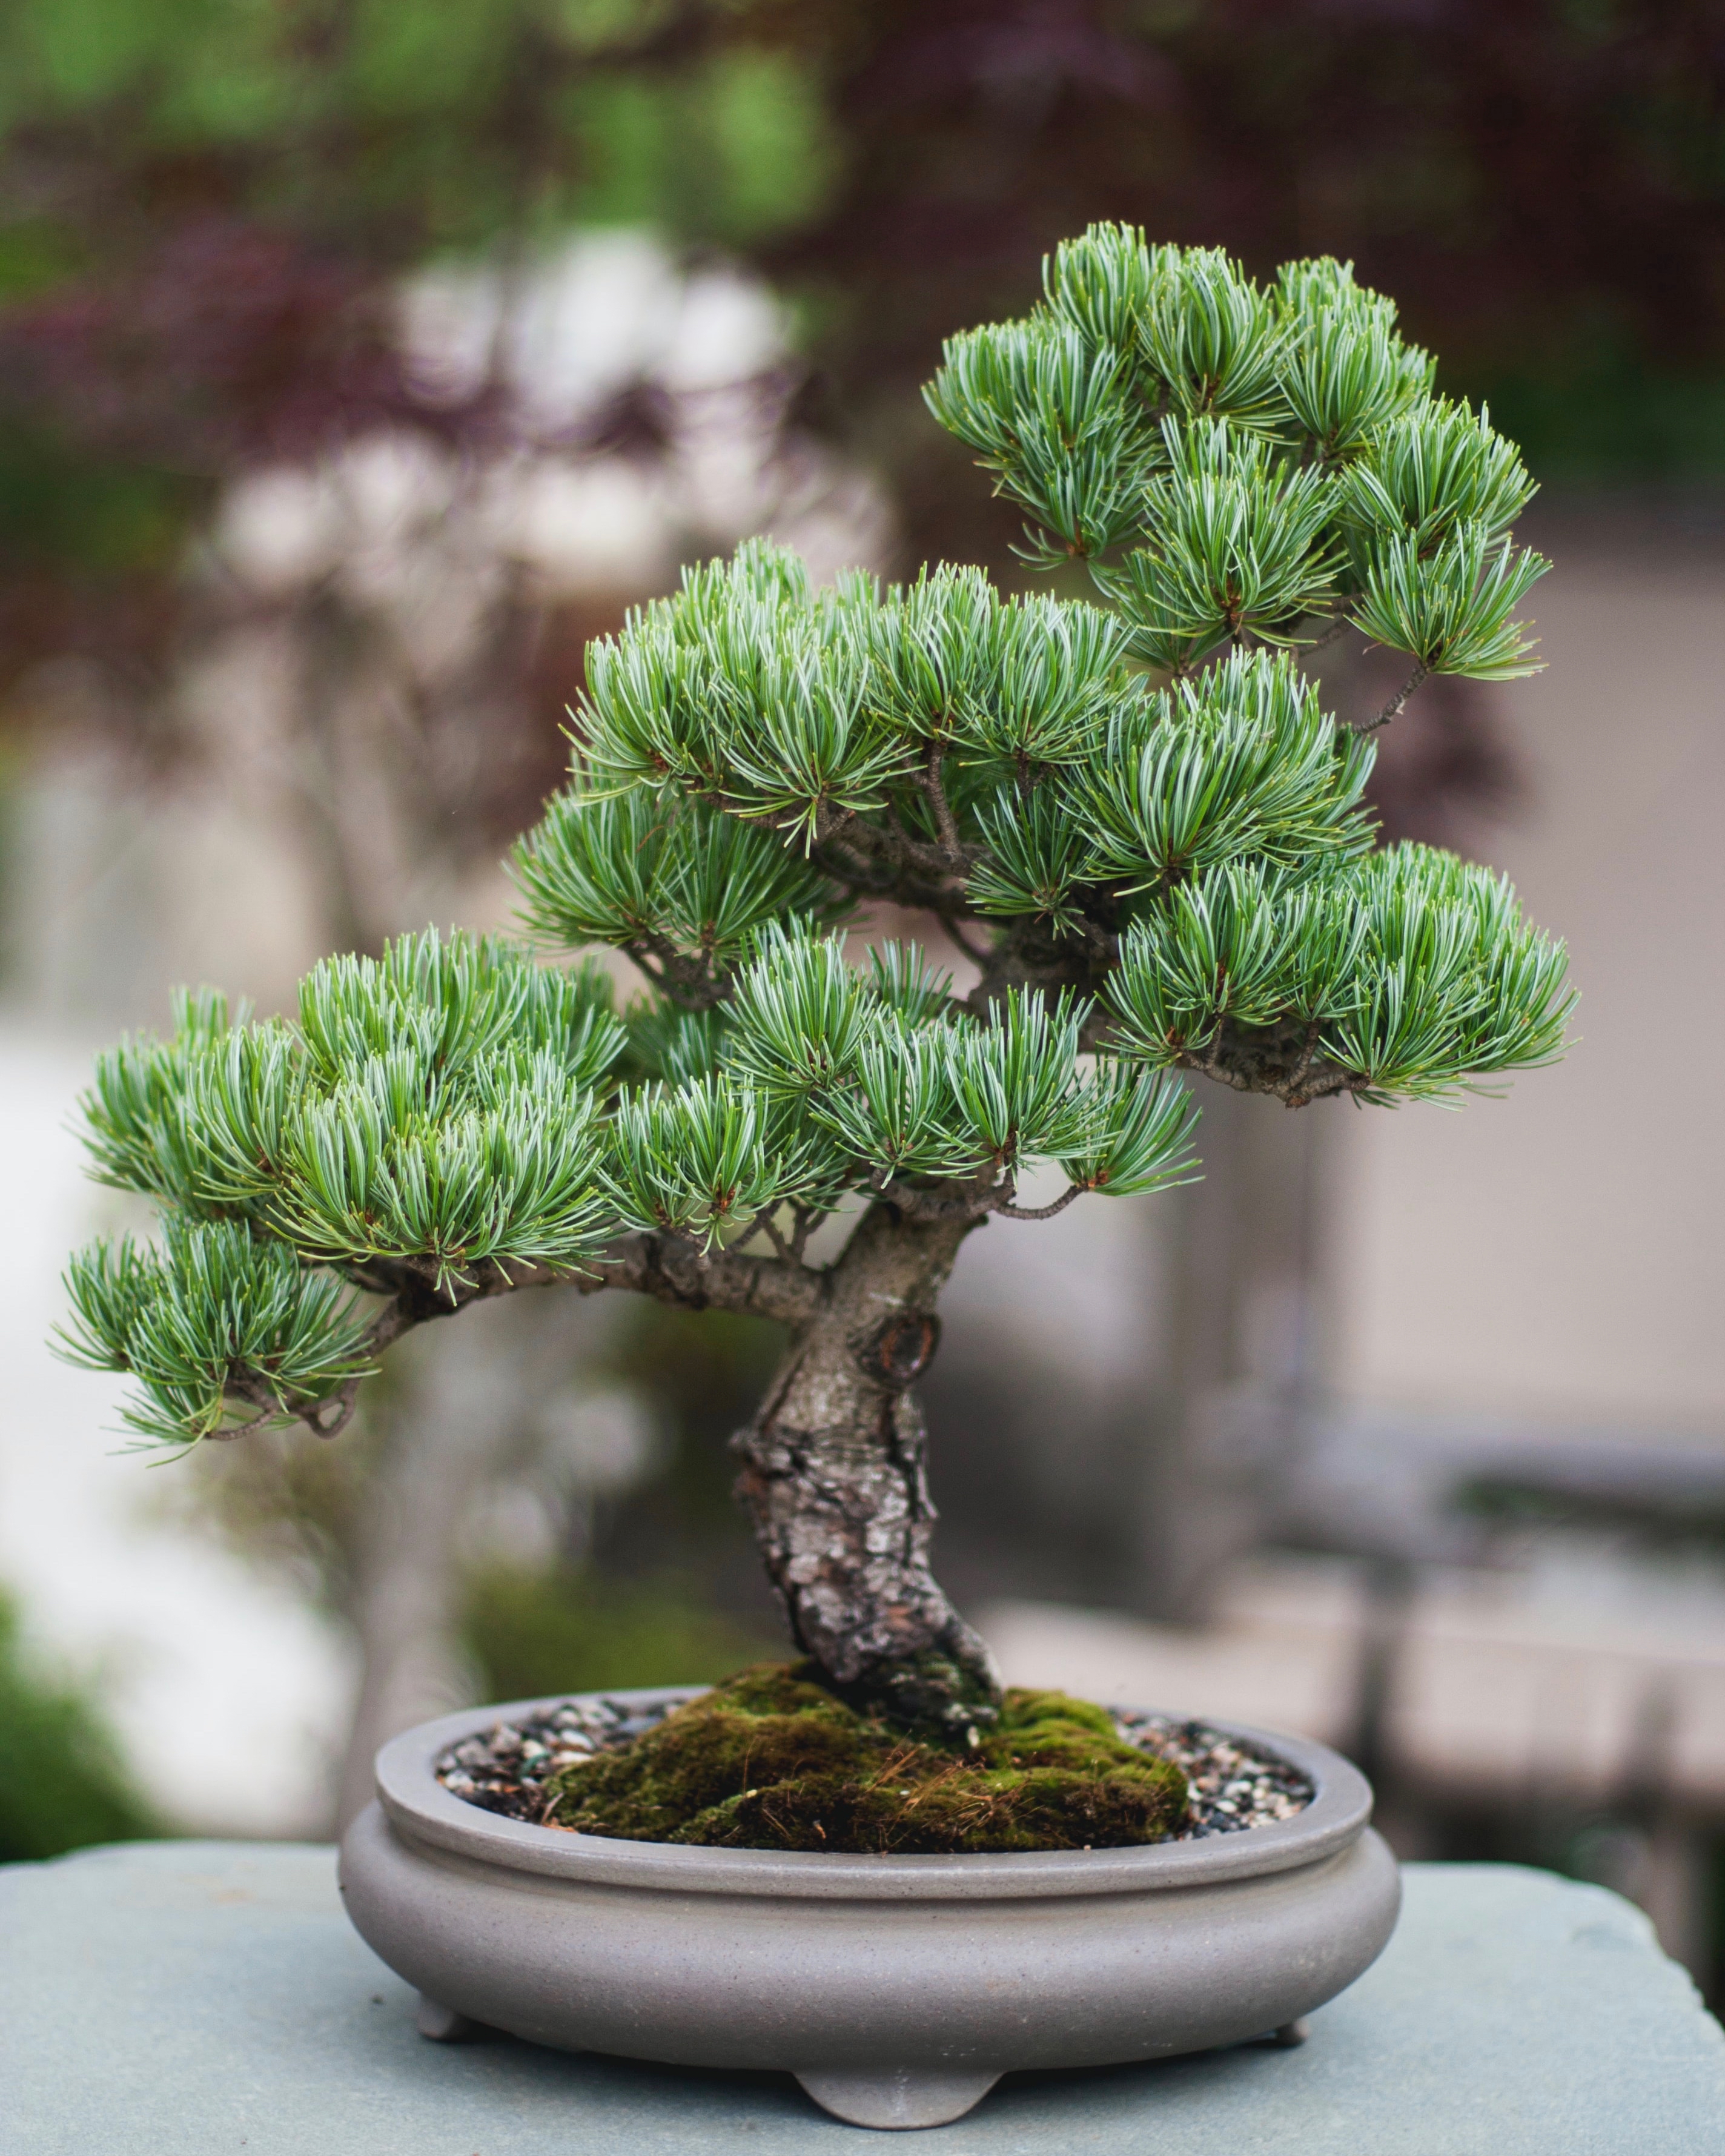 artfully crafted pine bonsai tree set into oval Tokoname clay pot with a moss bed